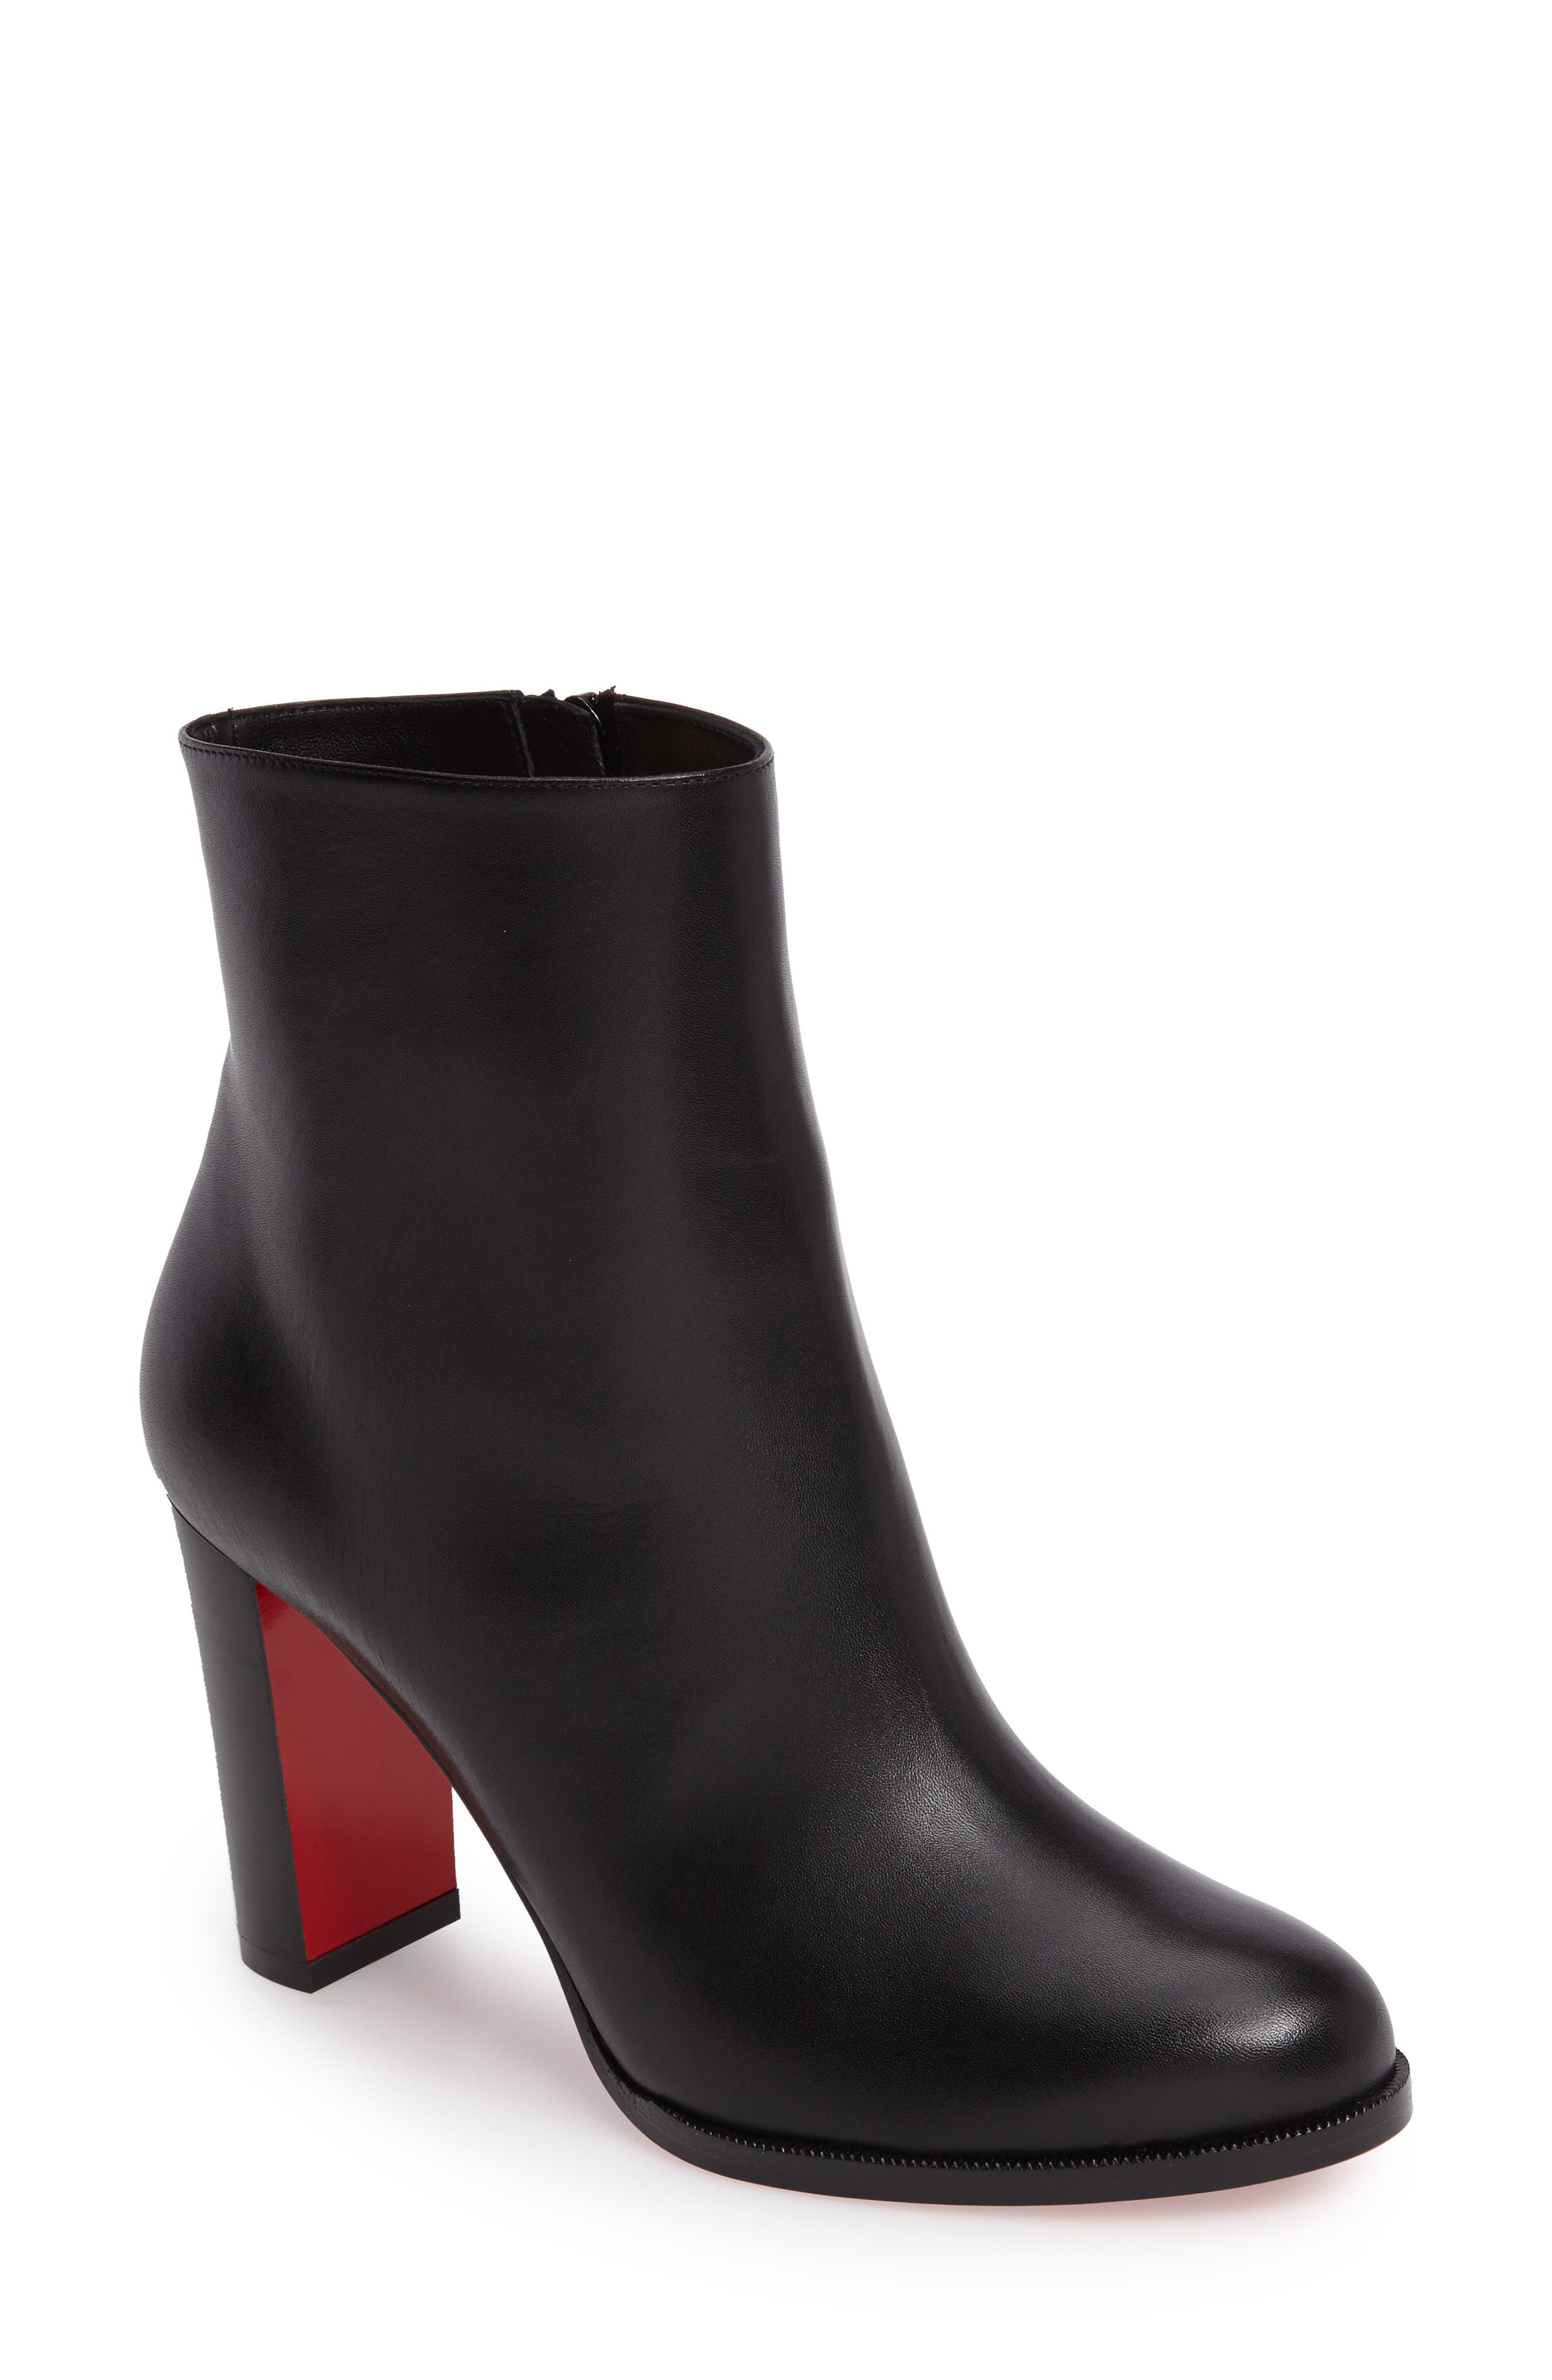 Christian Louboutin Adox Store, 55% OFF | www.hcb.cat